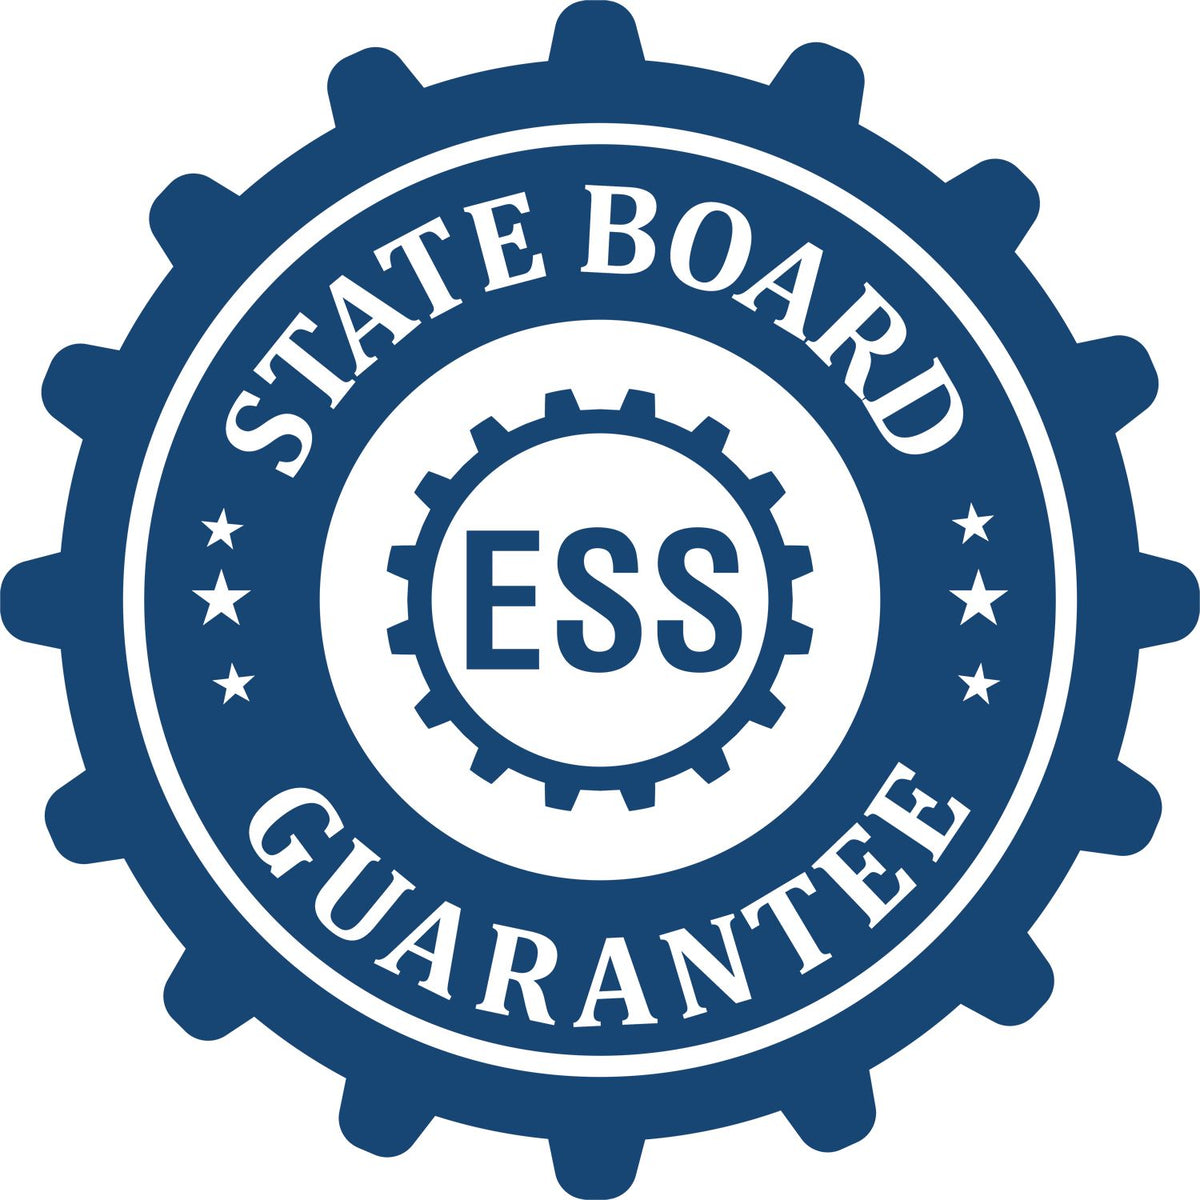 An emblem in a gear shape illustrating a state board guarantee for the Delaware Professional Geologist Seal Stamp